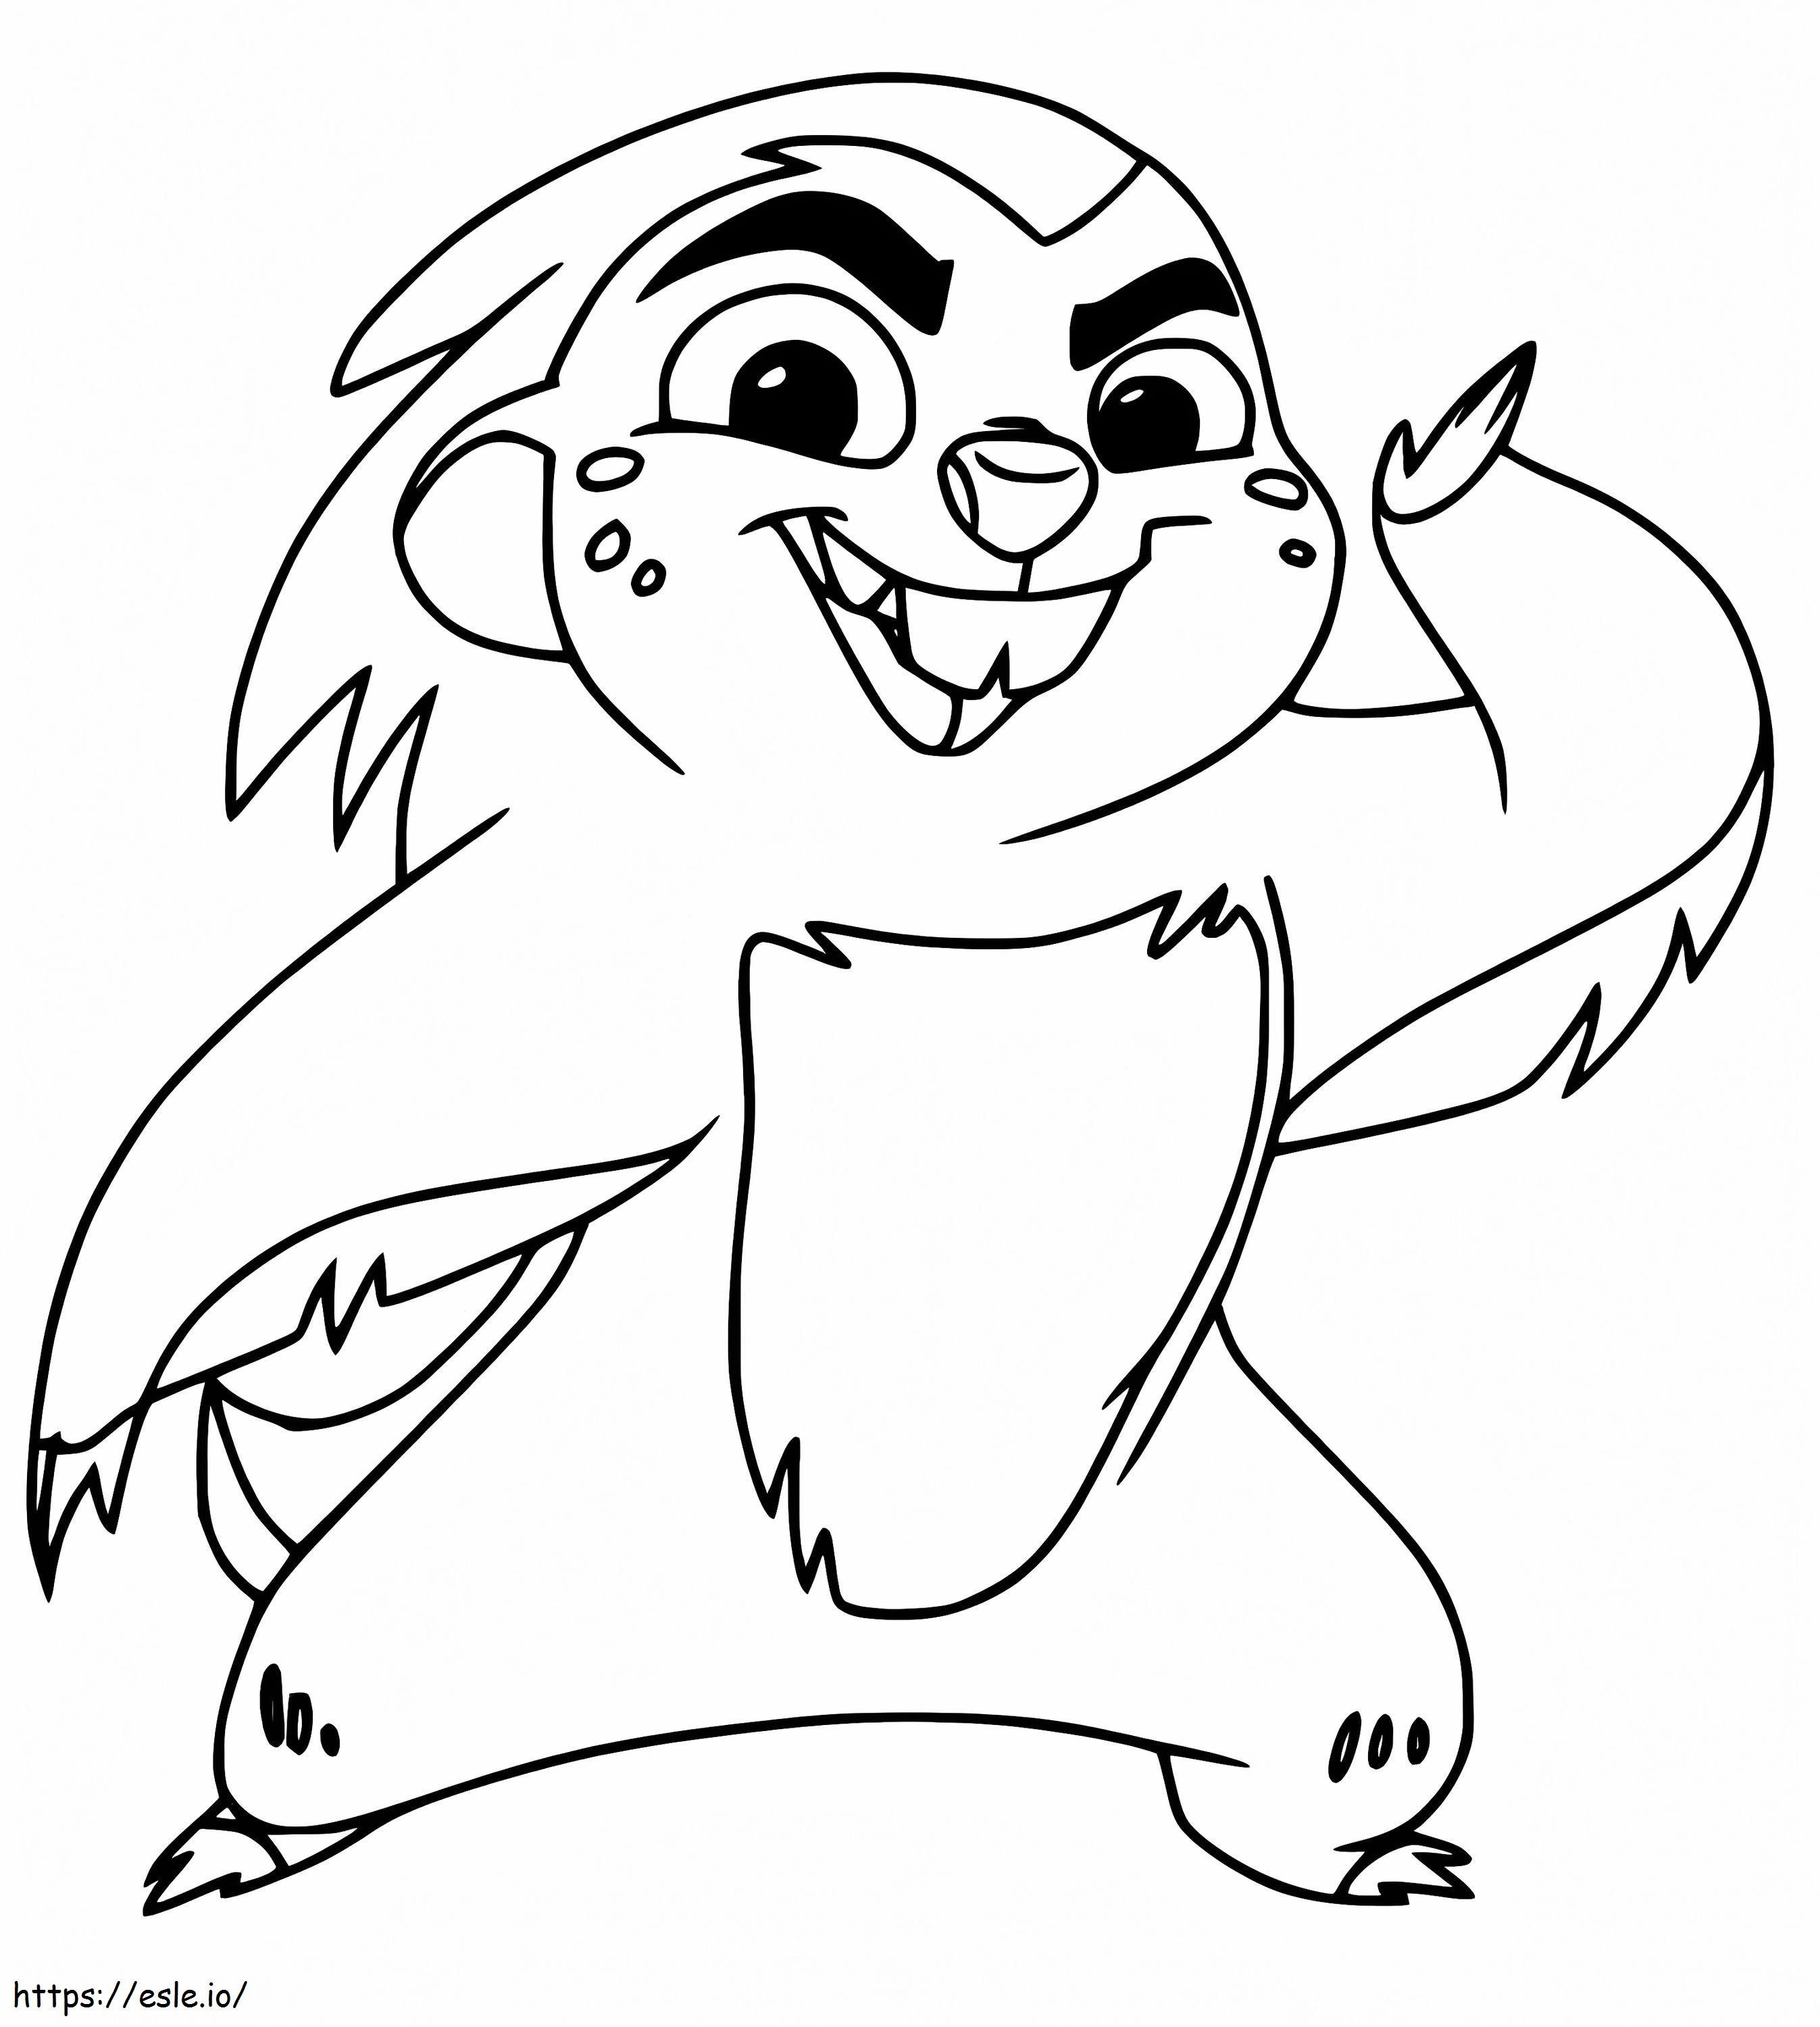 Bunga Of The Lion Guard coloring page